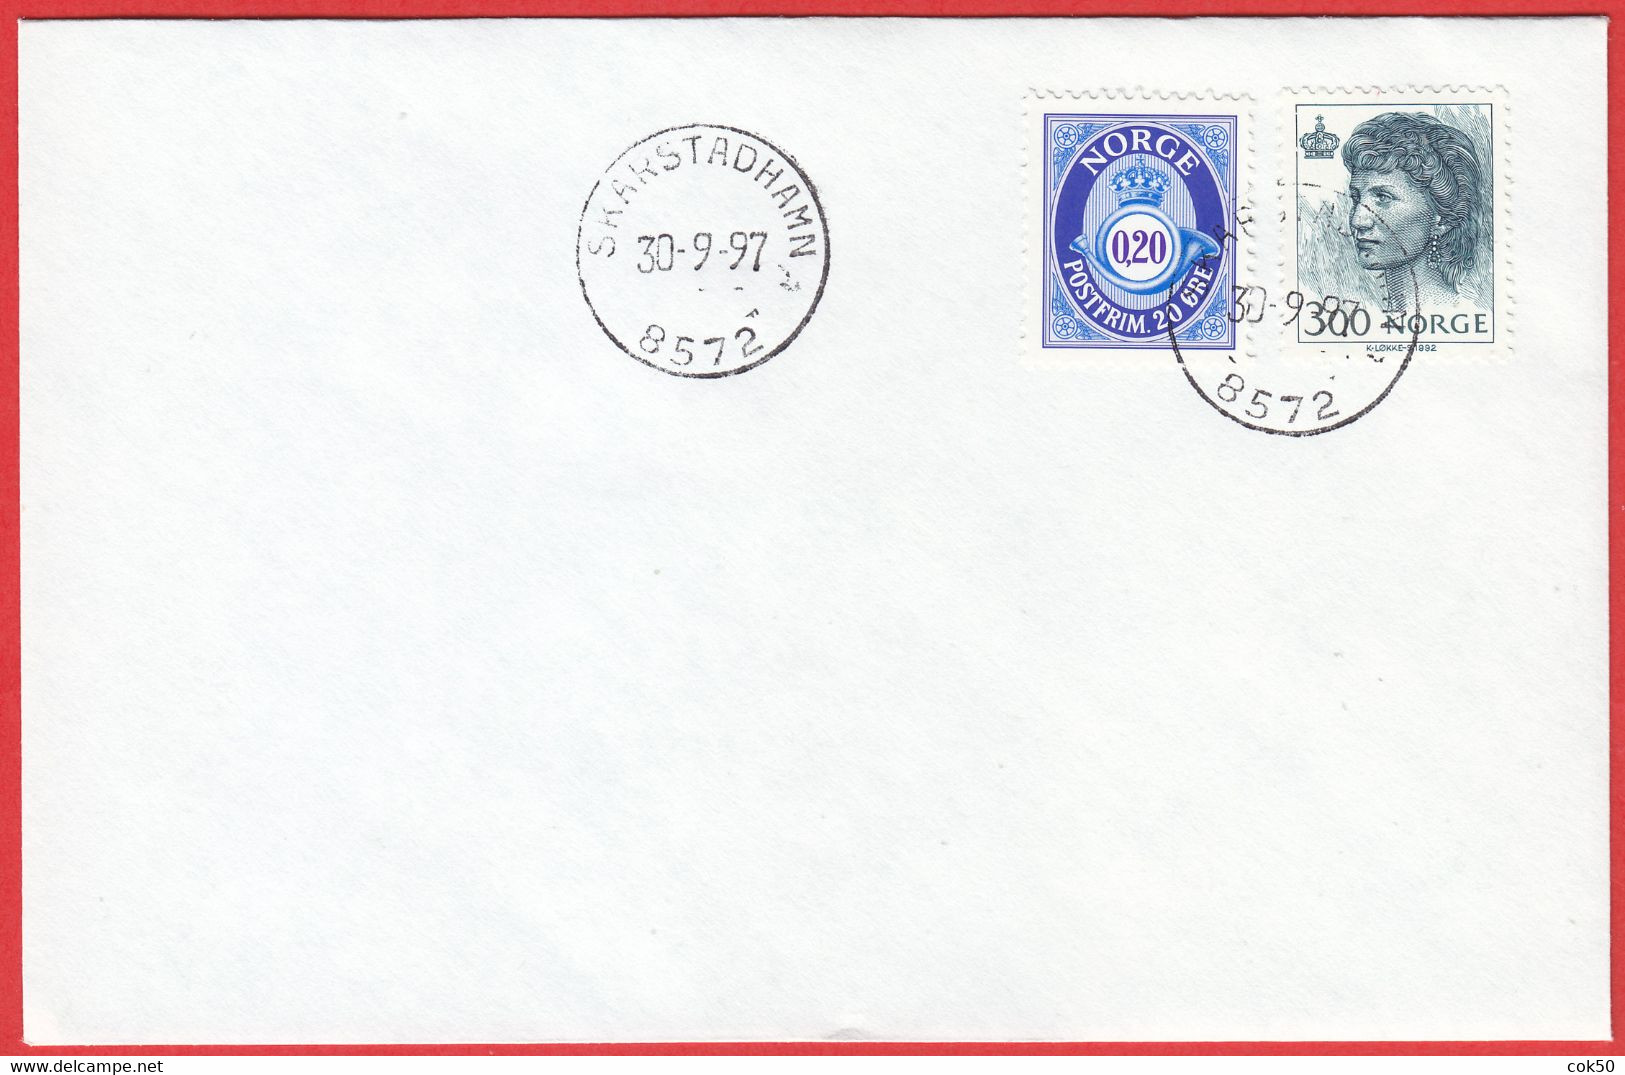 NORWAY -  8572 SKARSTADHAMN - (Nordland County) - Last Day/postoffice Closed On 1997.09.30 - Local Post Stamps